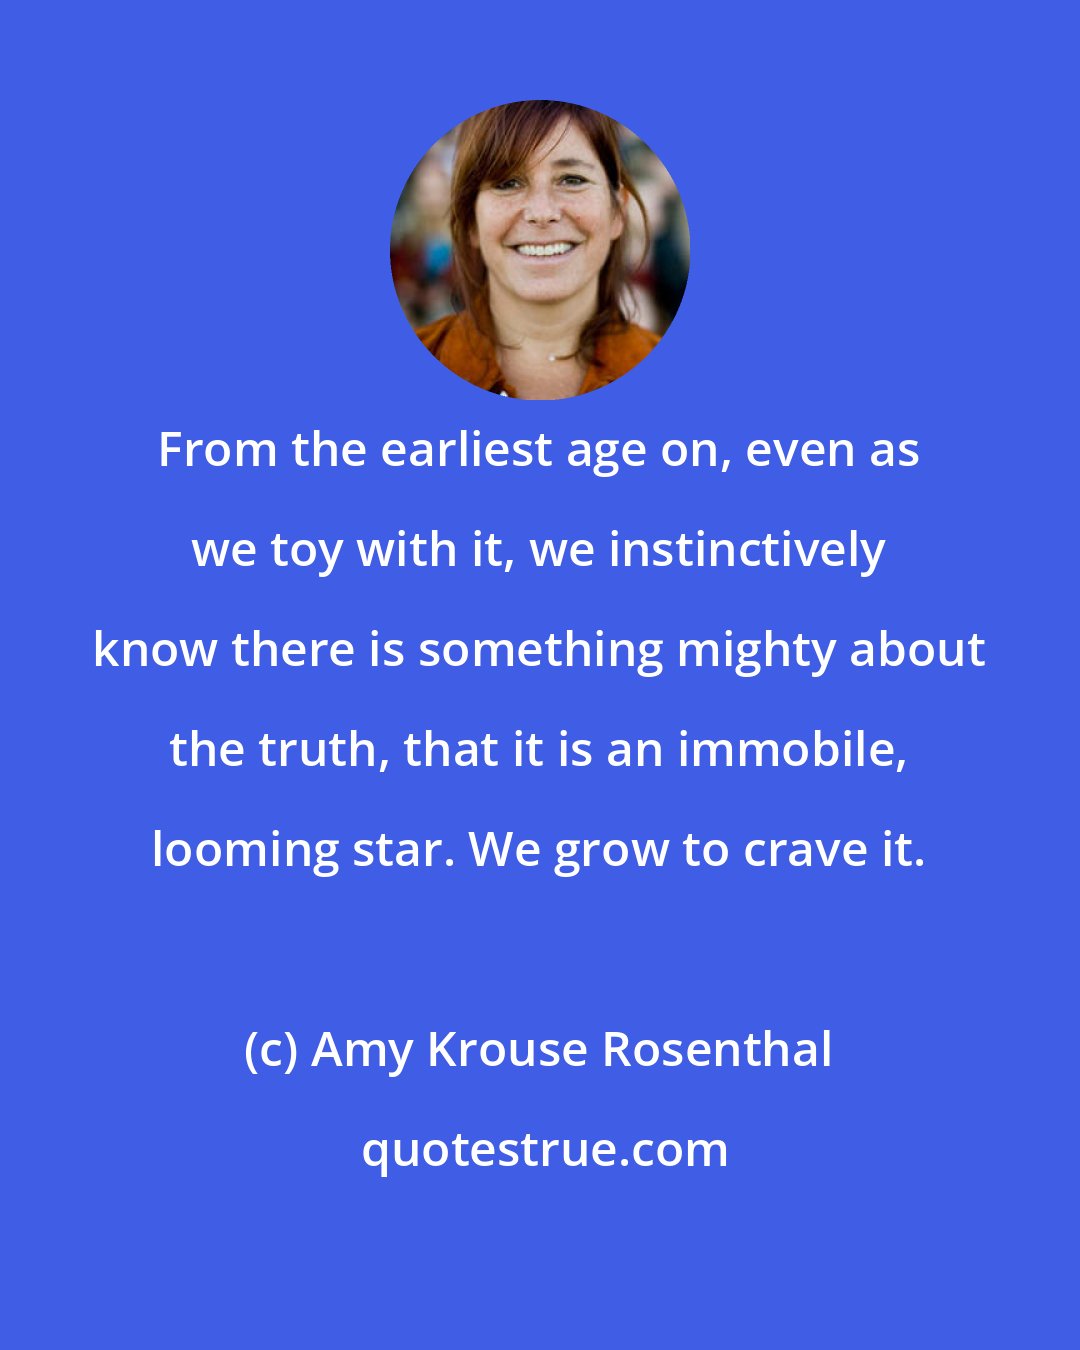 Amy Krouse Rosenthal: From the earliest age on, even as we toy with it, we instinctively know there is something mighty about the truth, that it is an immobile, looming star. We grow to crave it.